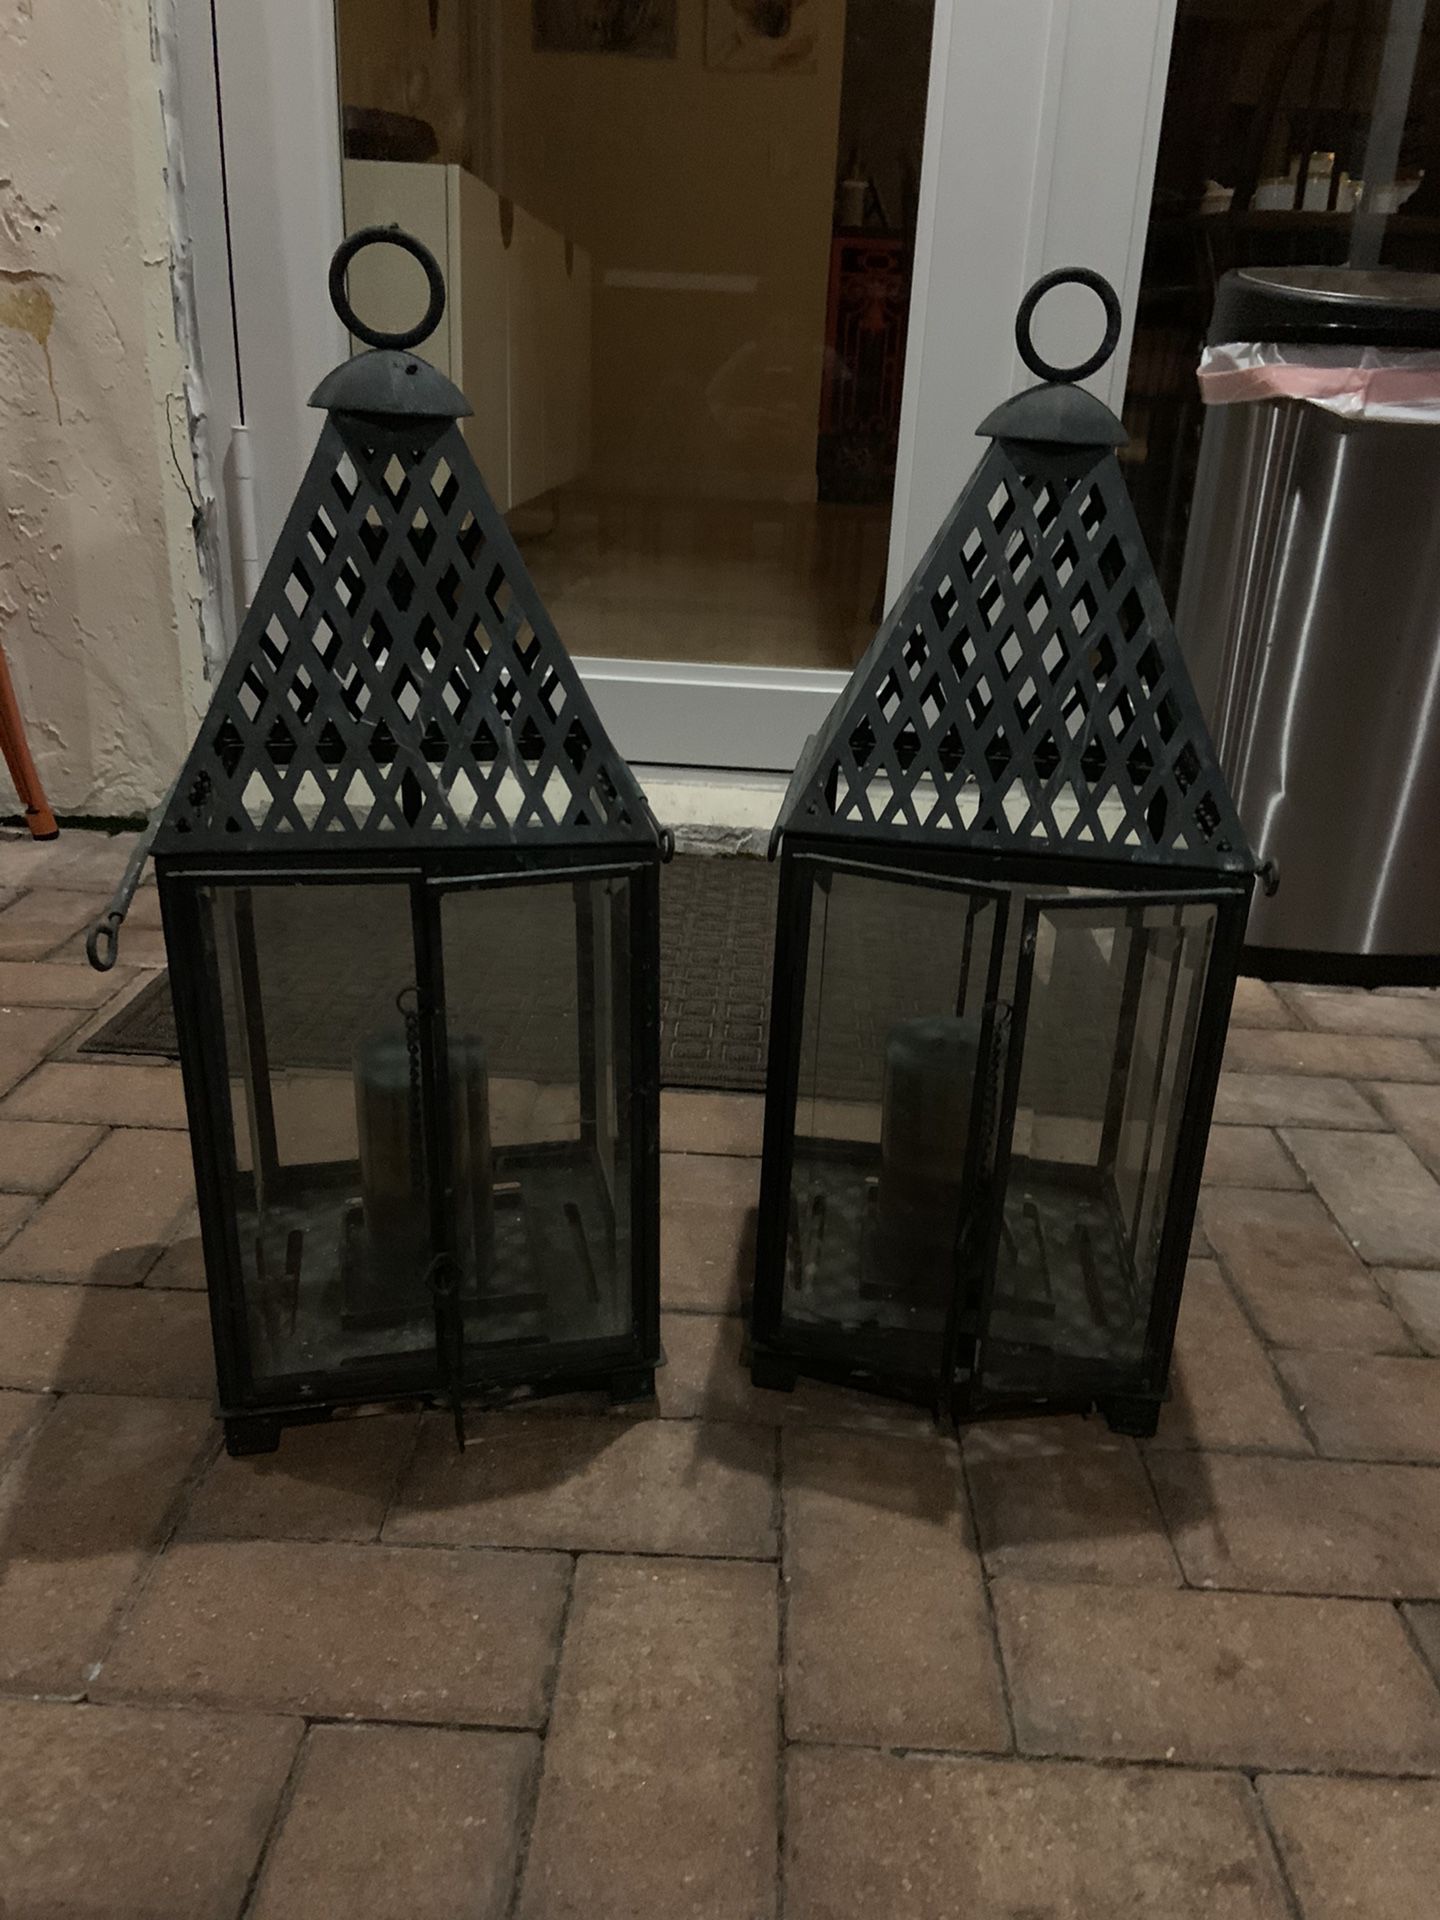 Frontgate candle holders